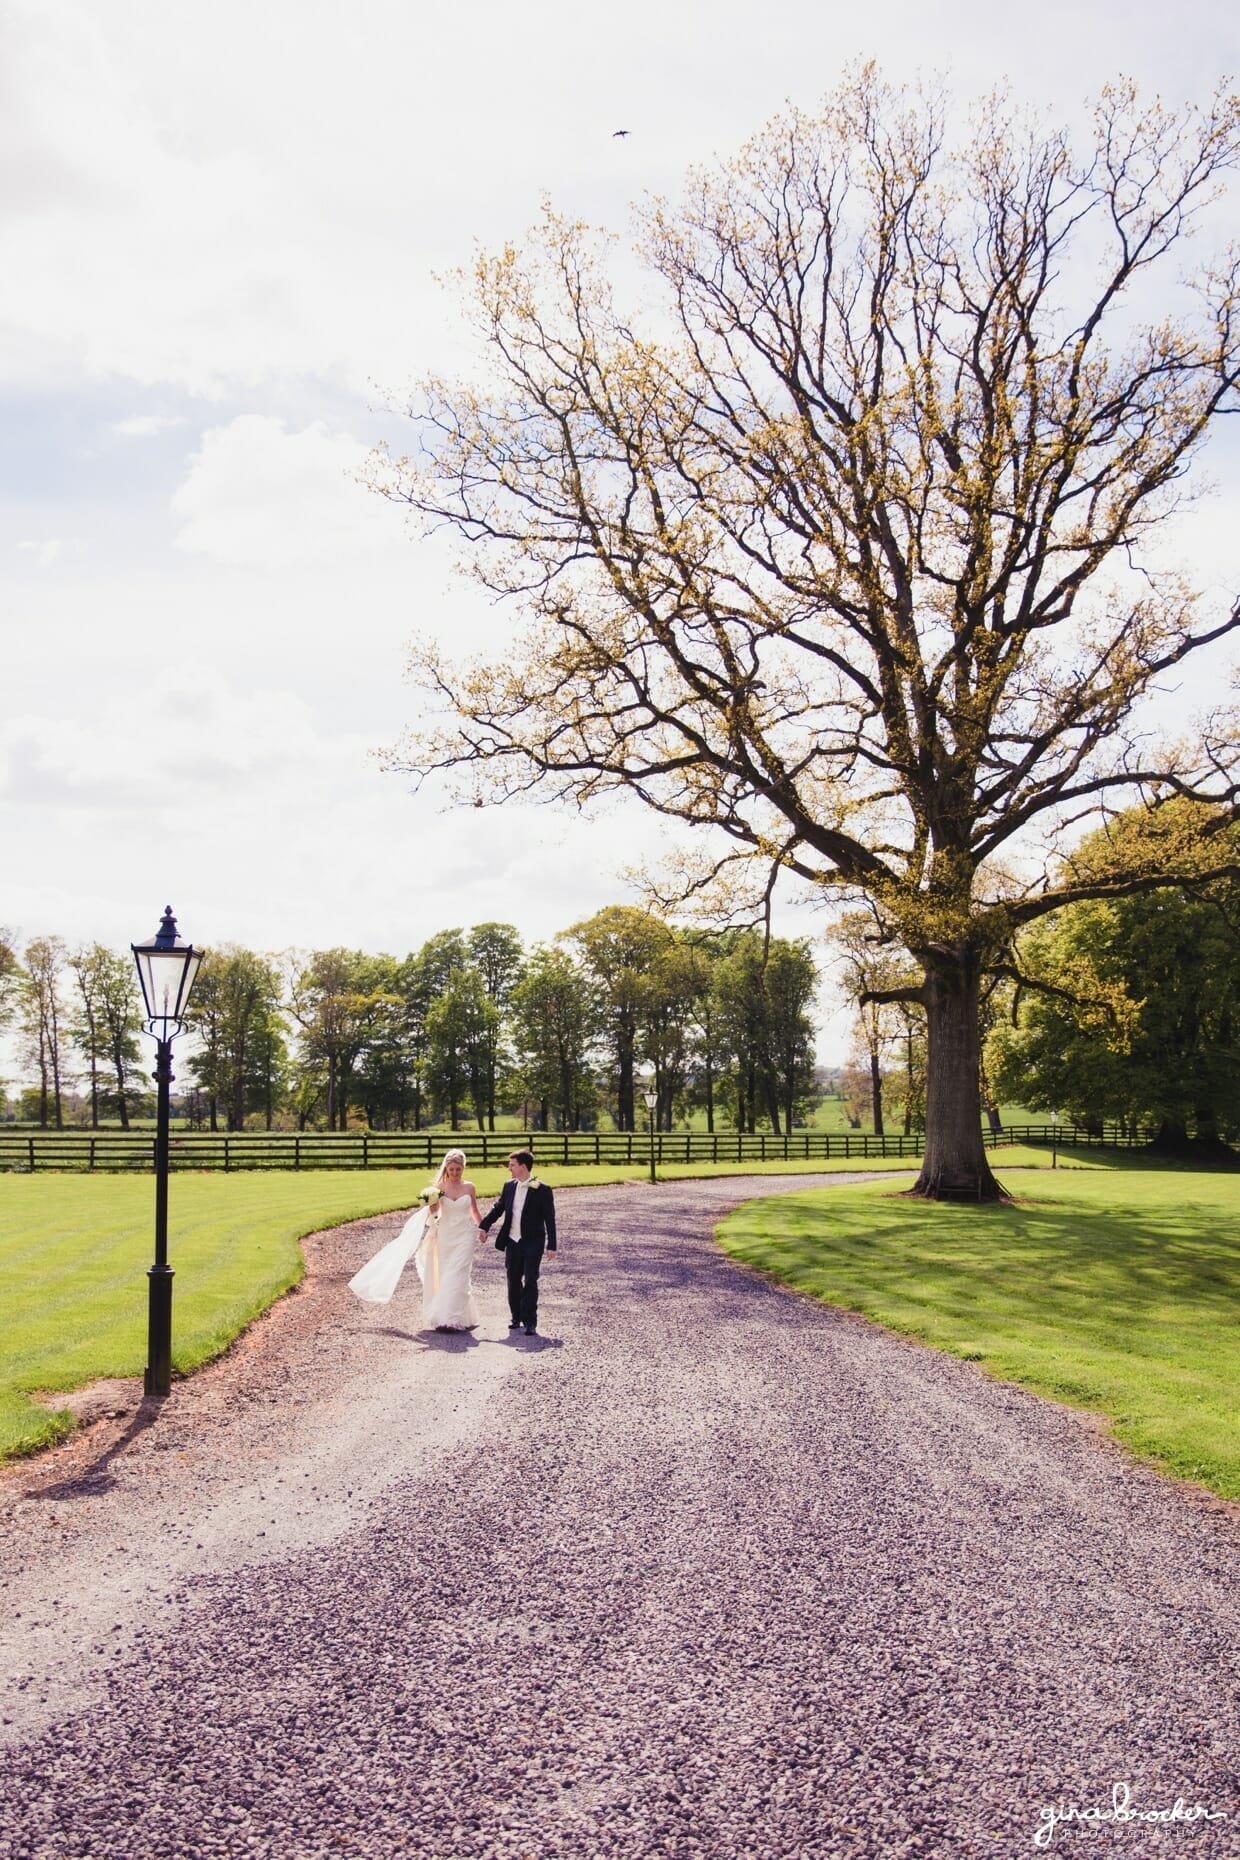 The bride and groom share a romantic walk during their classic vintage wedding